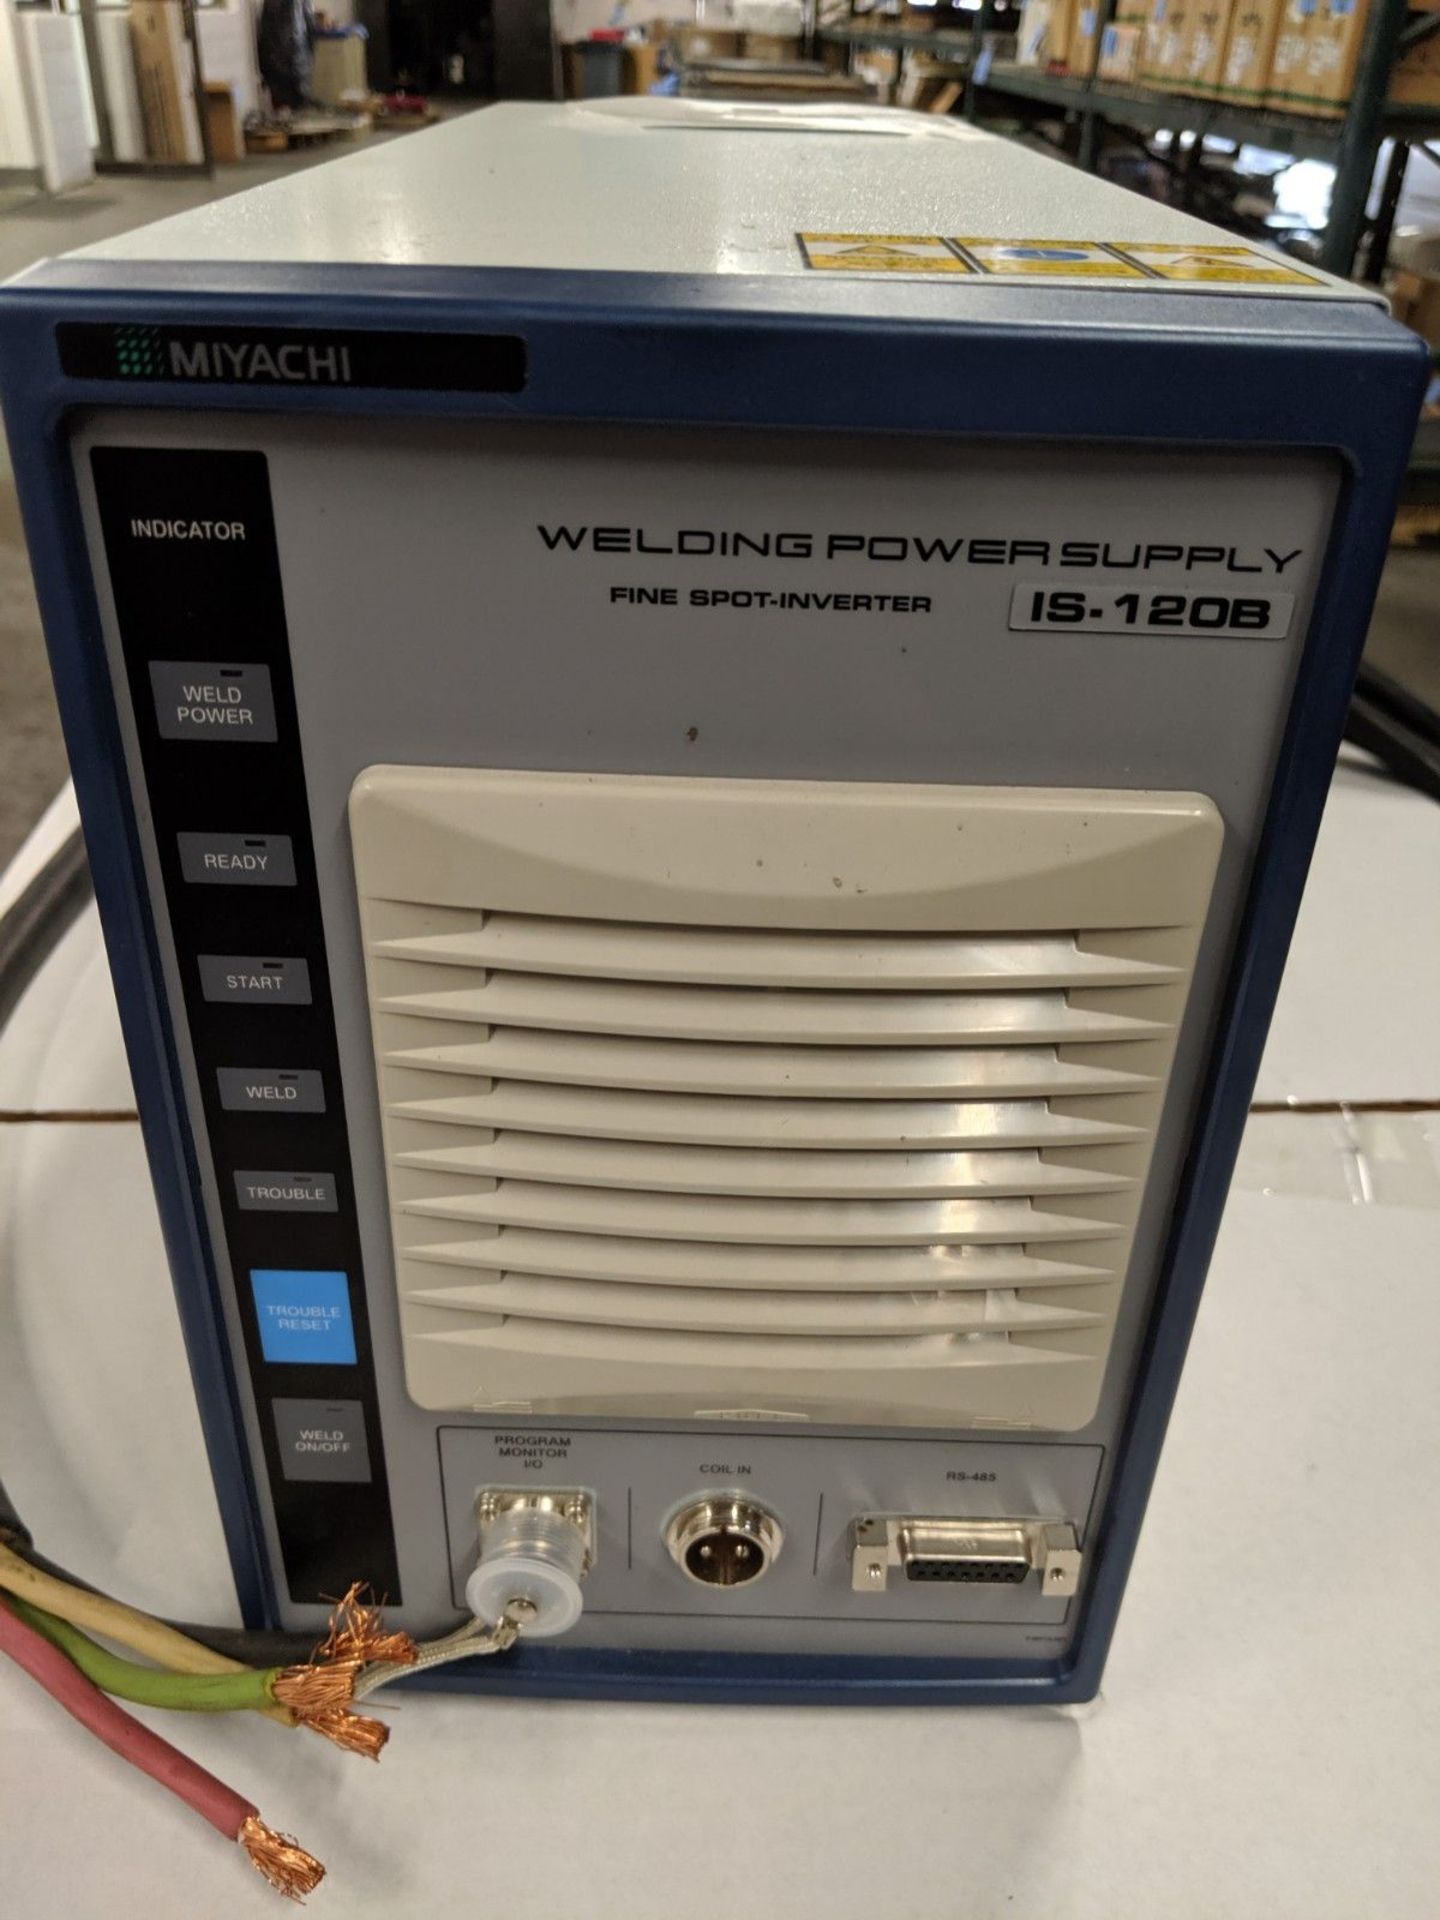 MIYACHI FINE SPOT INVERTER WELDING POWER SUPPLY, MODEL IS-120B, S/N 0525625, WITH CABLE AND DISK - Image 2 of 6